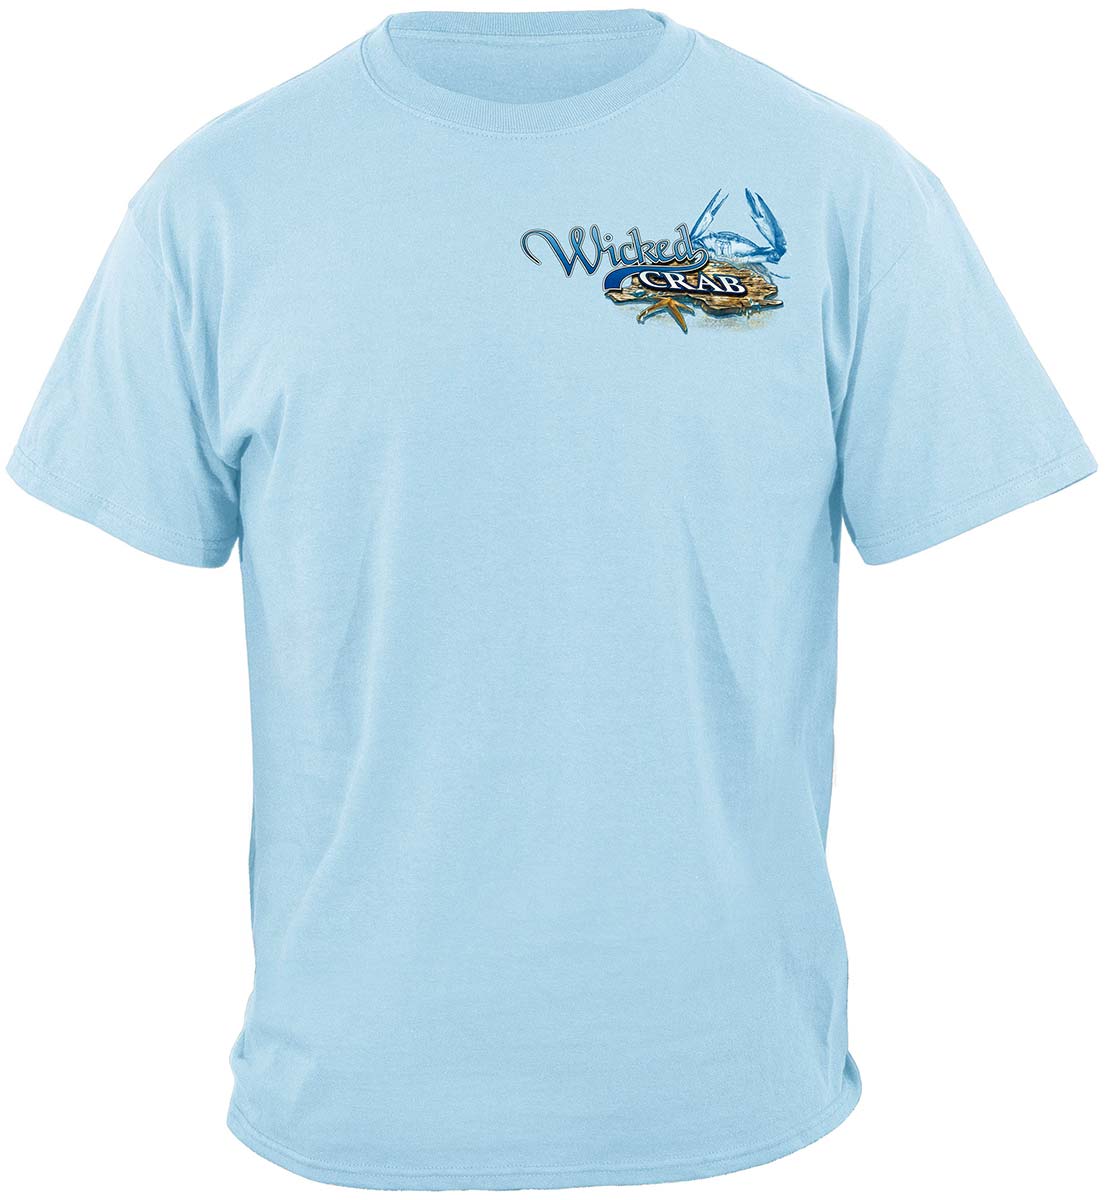 Wicked Fish Crab And Star Fish Premium Long Sleeves